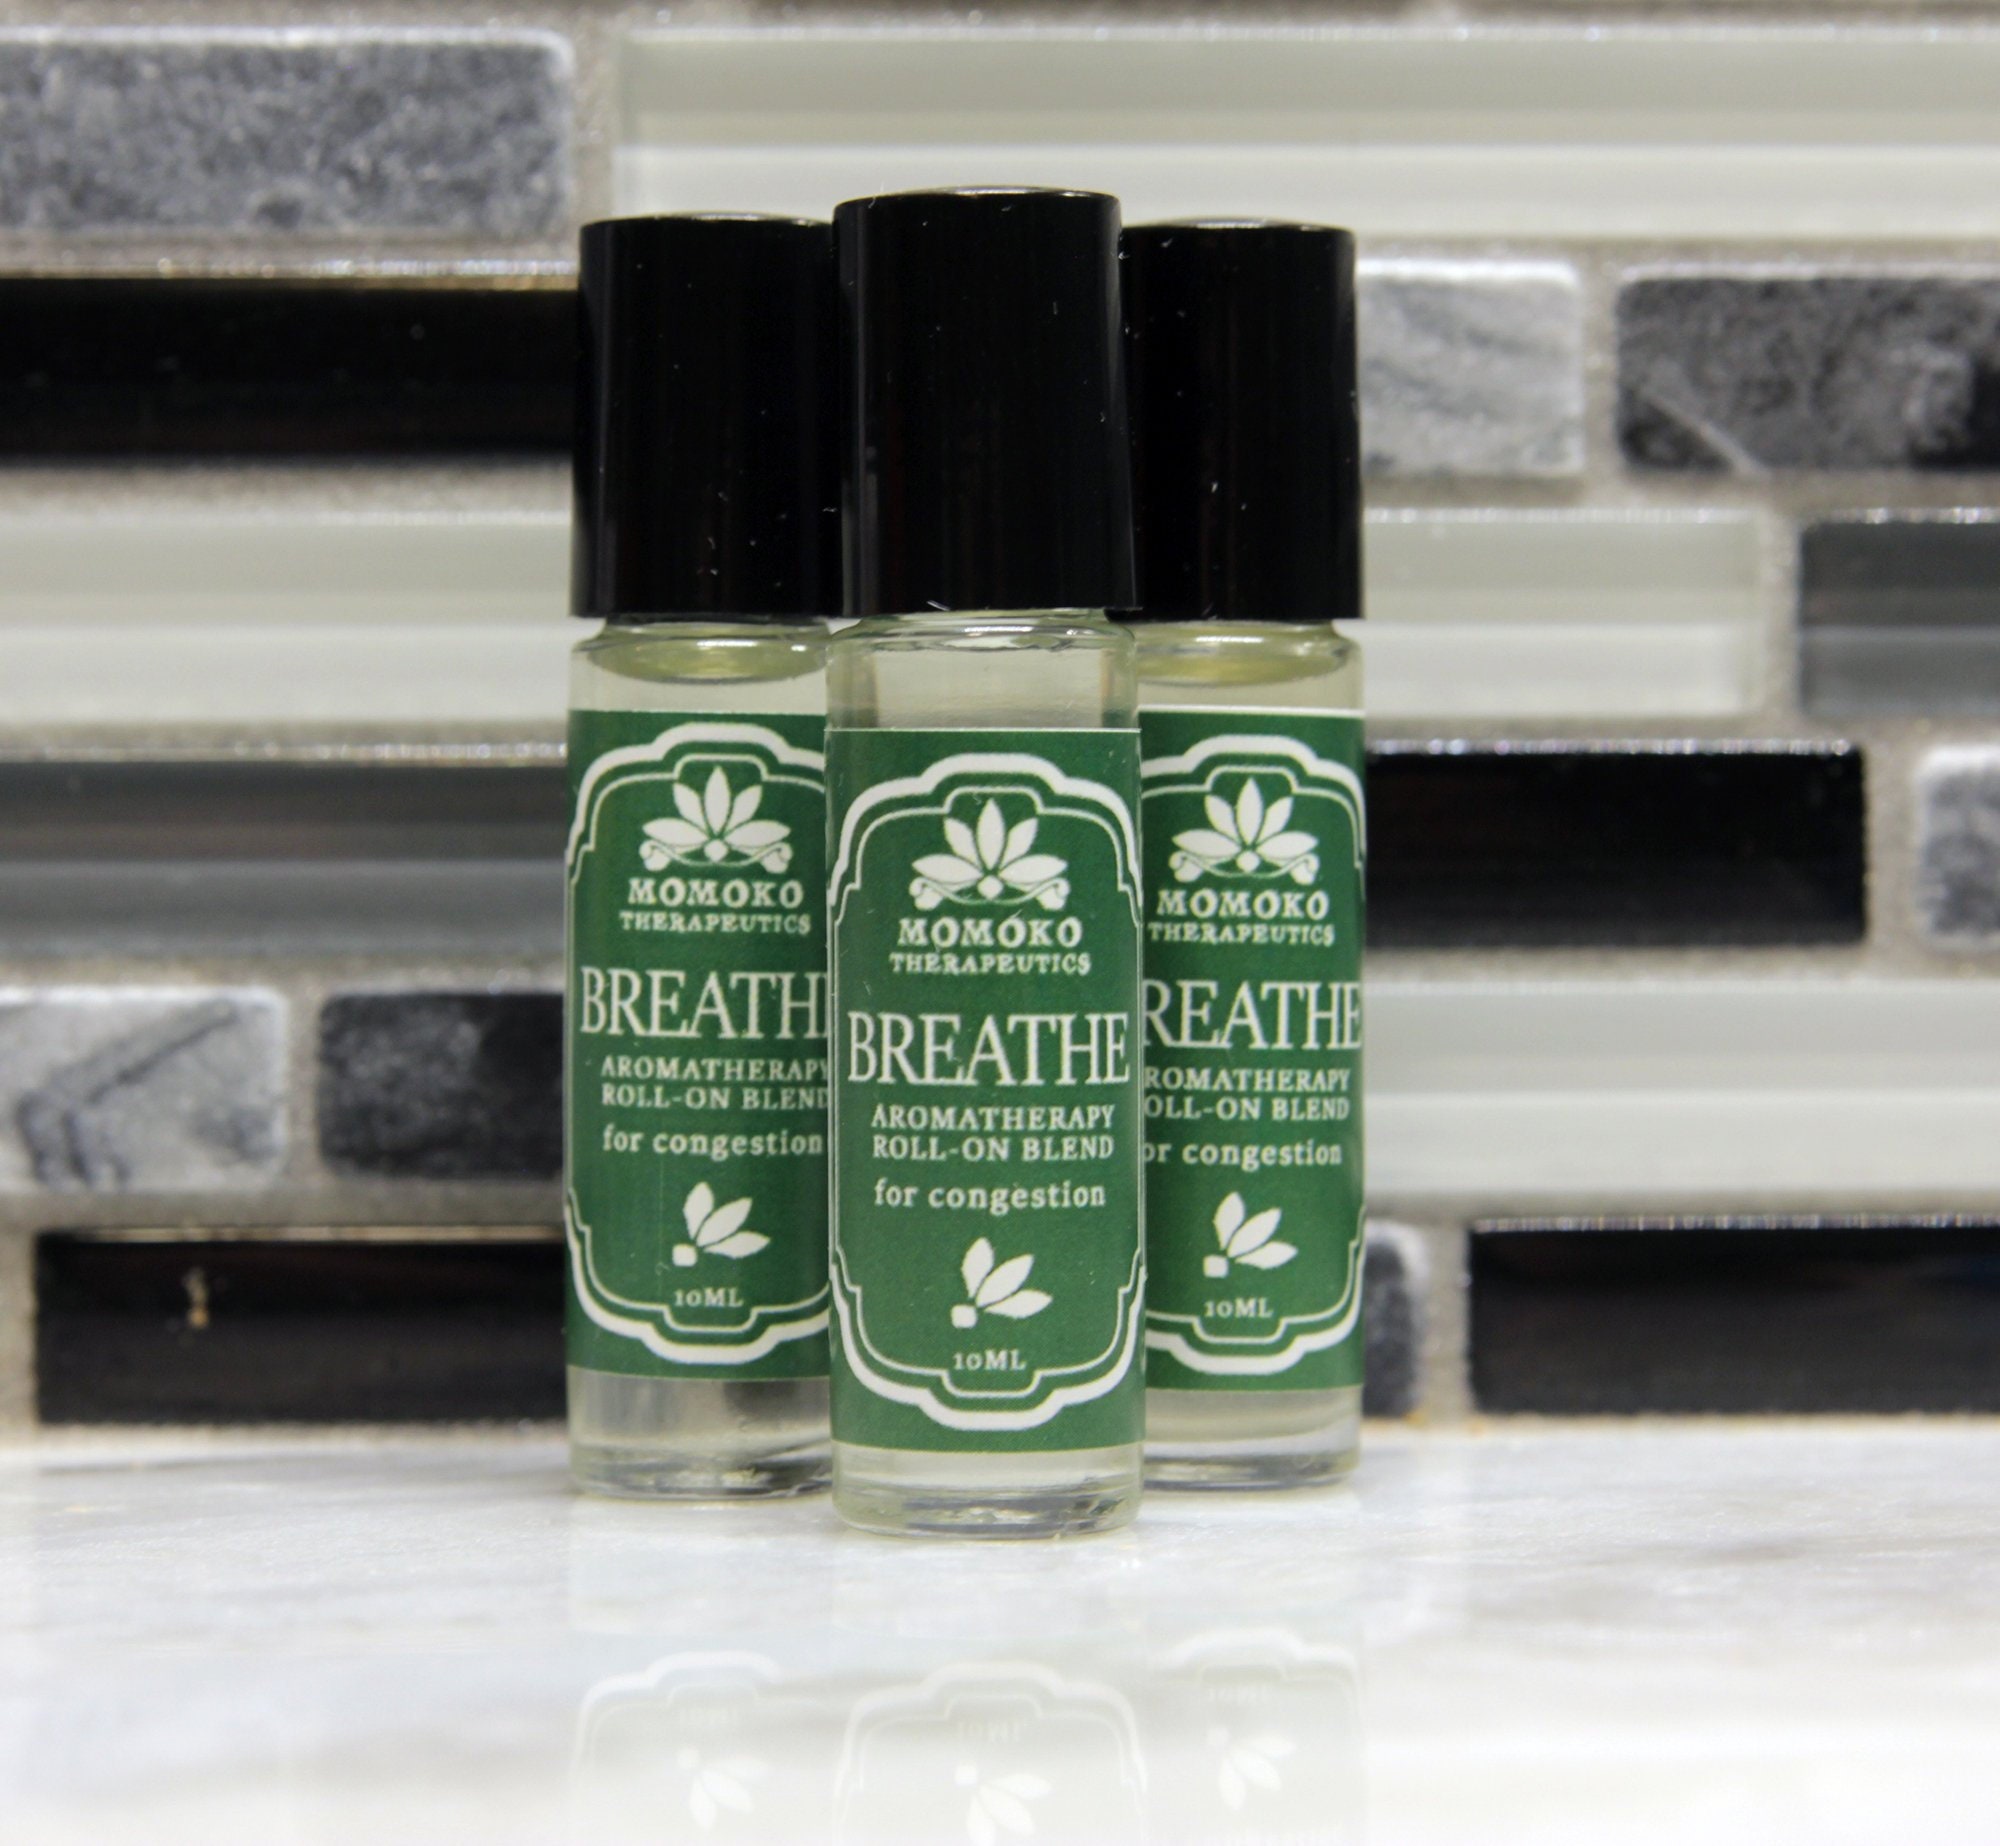 Breathe - Aromatherapy Roll-On Blend- All Natural, Vegan, Organic Perfume Oil To Help With Allergies & Congestion